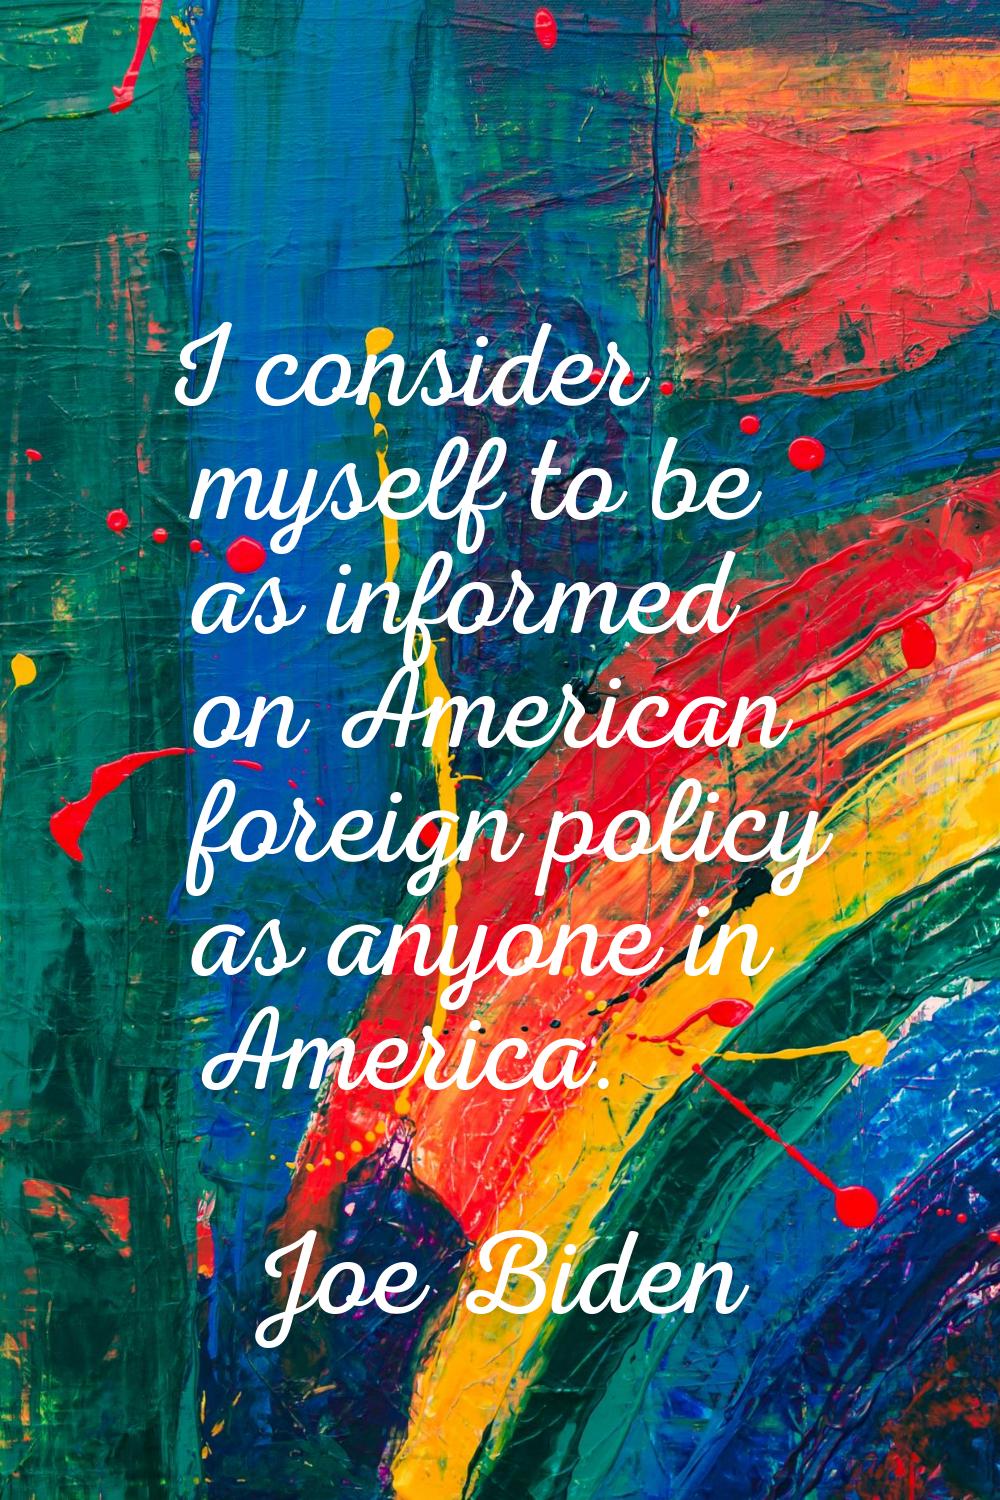 I consider myself to be as informed on American foreign policy as anyone in America.